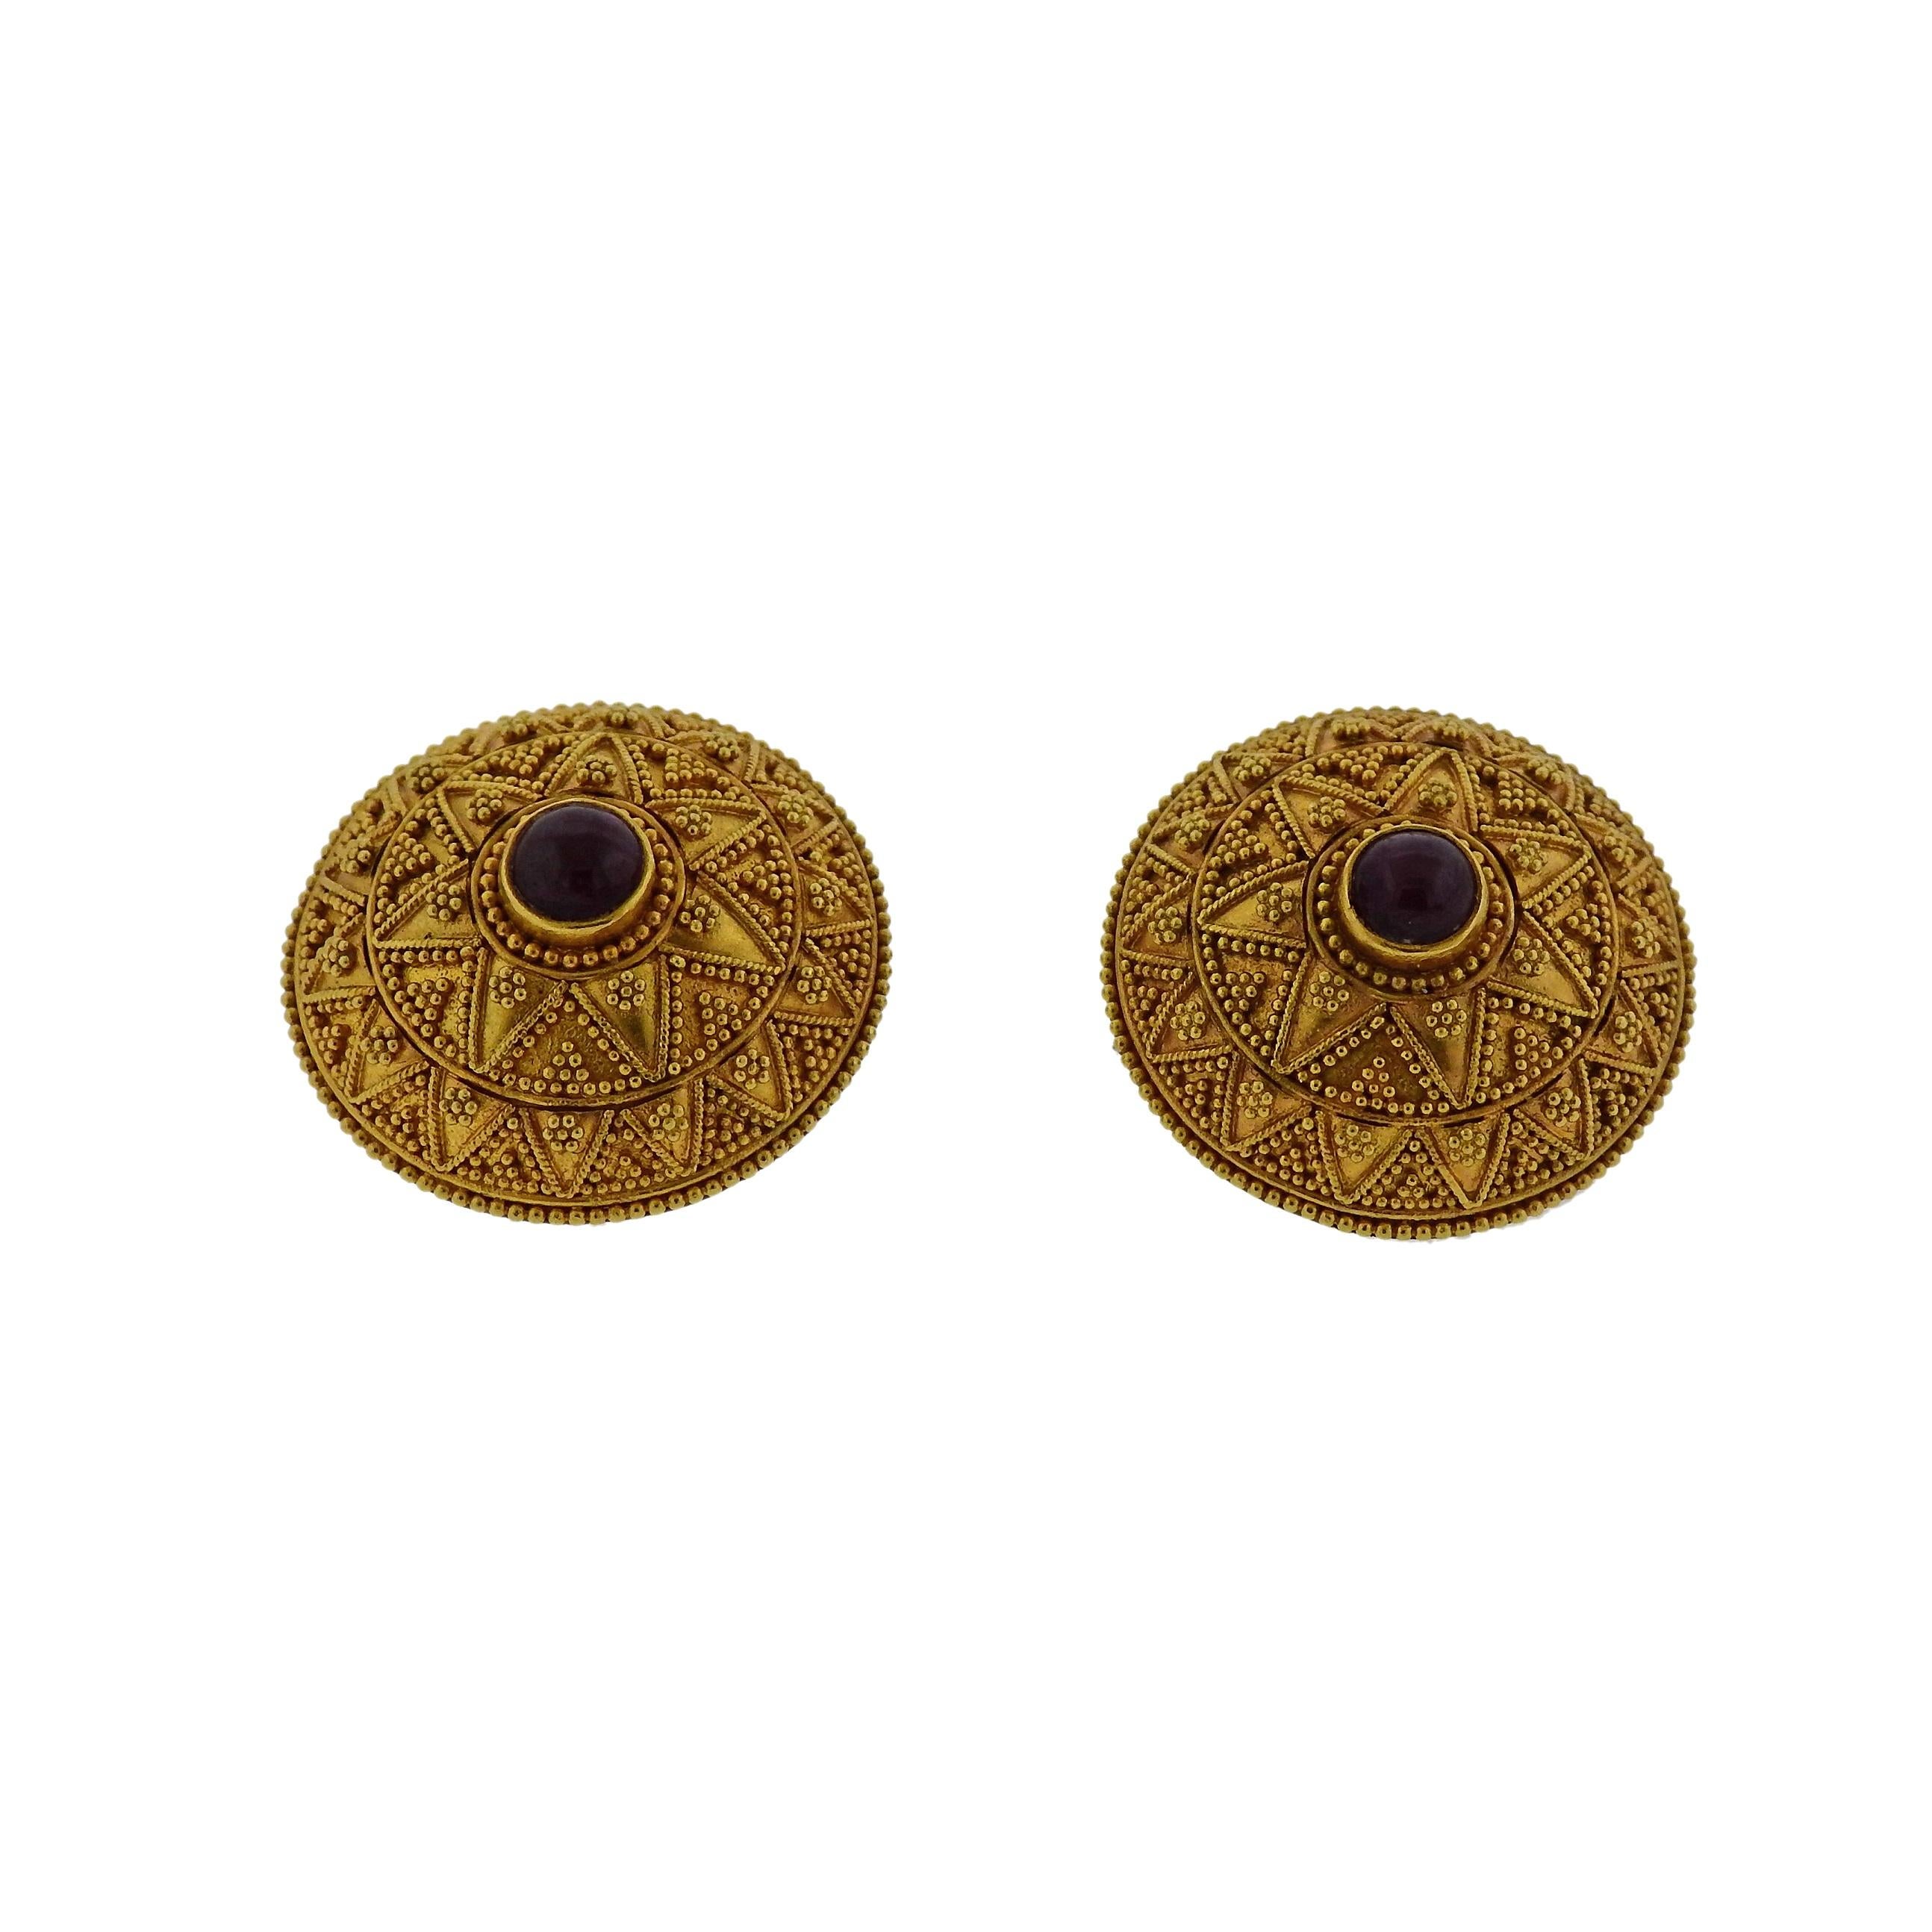 Pair of 18k yellow gold earrings, crafted by Greek designer Ilias Lalaounis, set with ruby cabochon in the center. Earrings are 23mm in diameter and weigh 20.2 grams. Marked Greece, 750, H 17, Maker's mark.